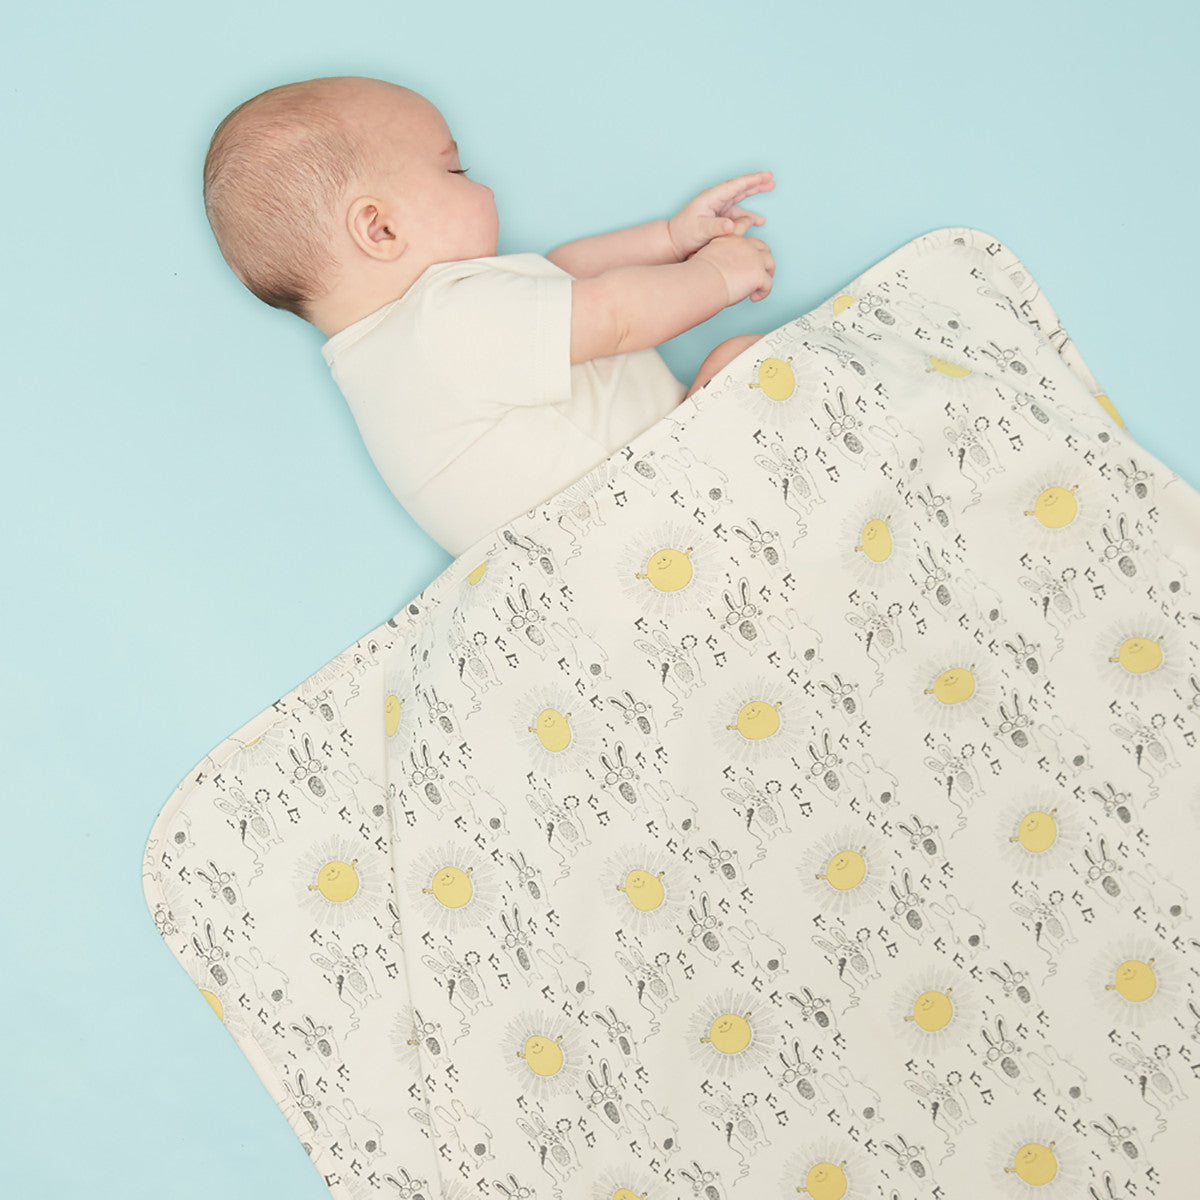 The Bonnie Mob Kids accessories Sunny Bunny Blanket - Ever Simplicity